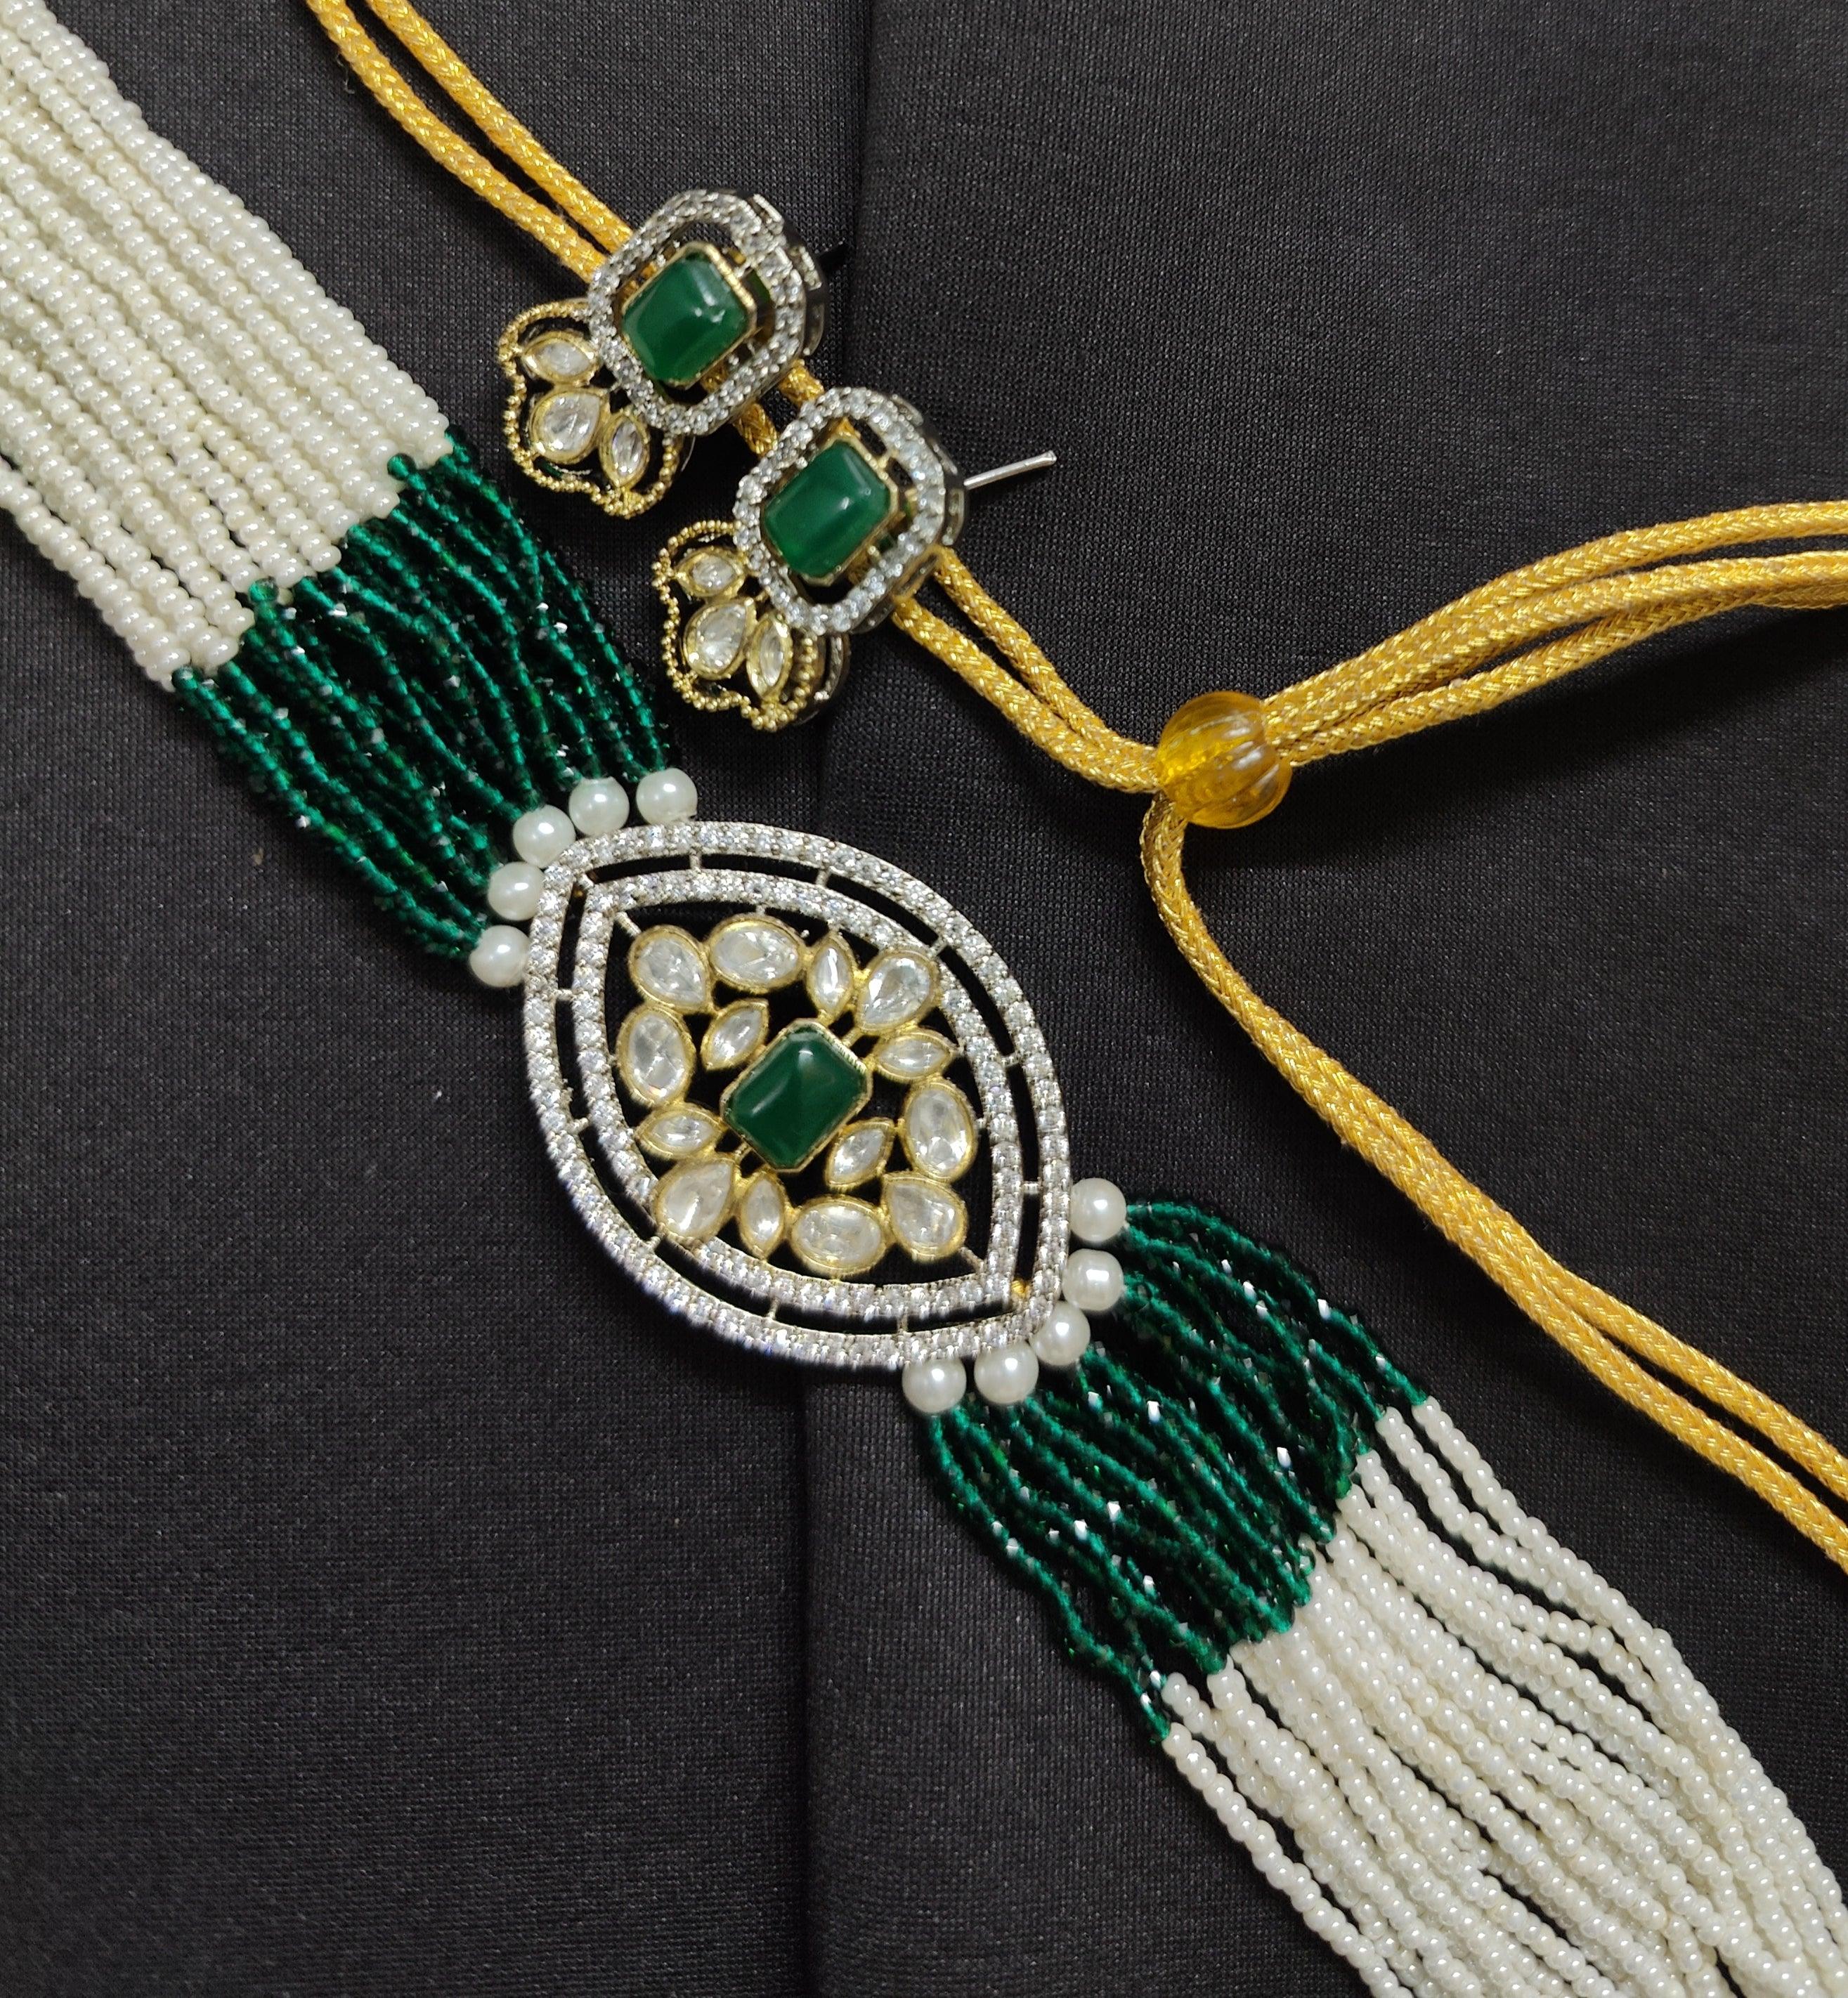 Bonhams. London. UK 18 Oct 2018 - A woman holds an emerald and diamond set  necklace from India (Late 19th Century) (est - £15,000- £20,000) A preview  of Bonhams Islamic and Indian,